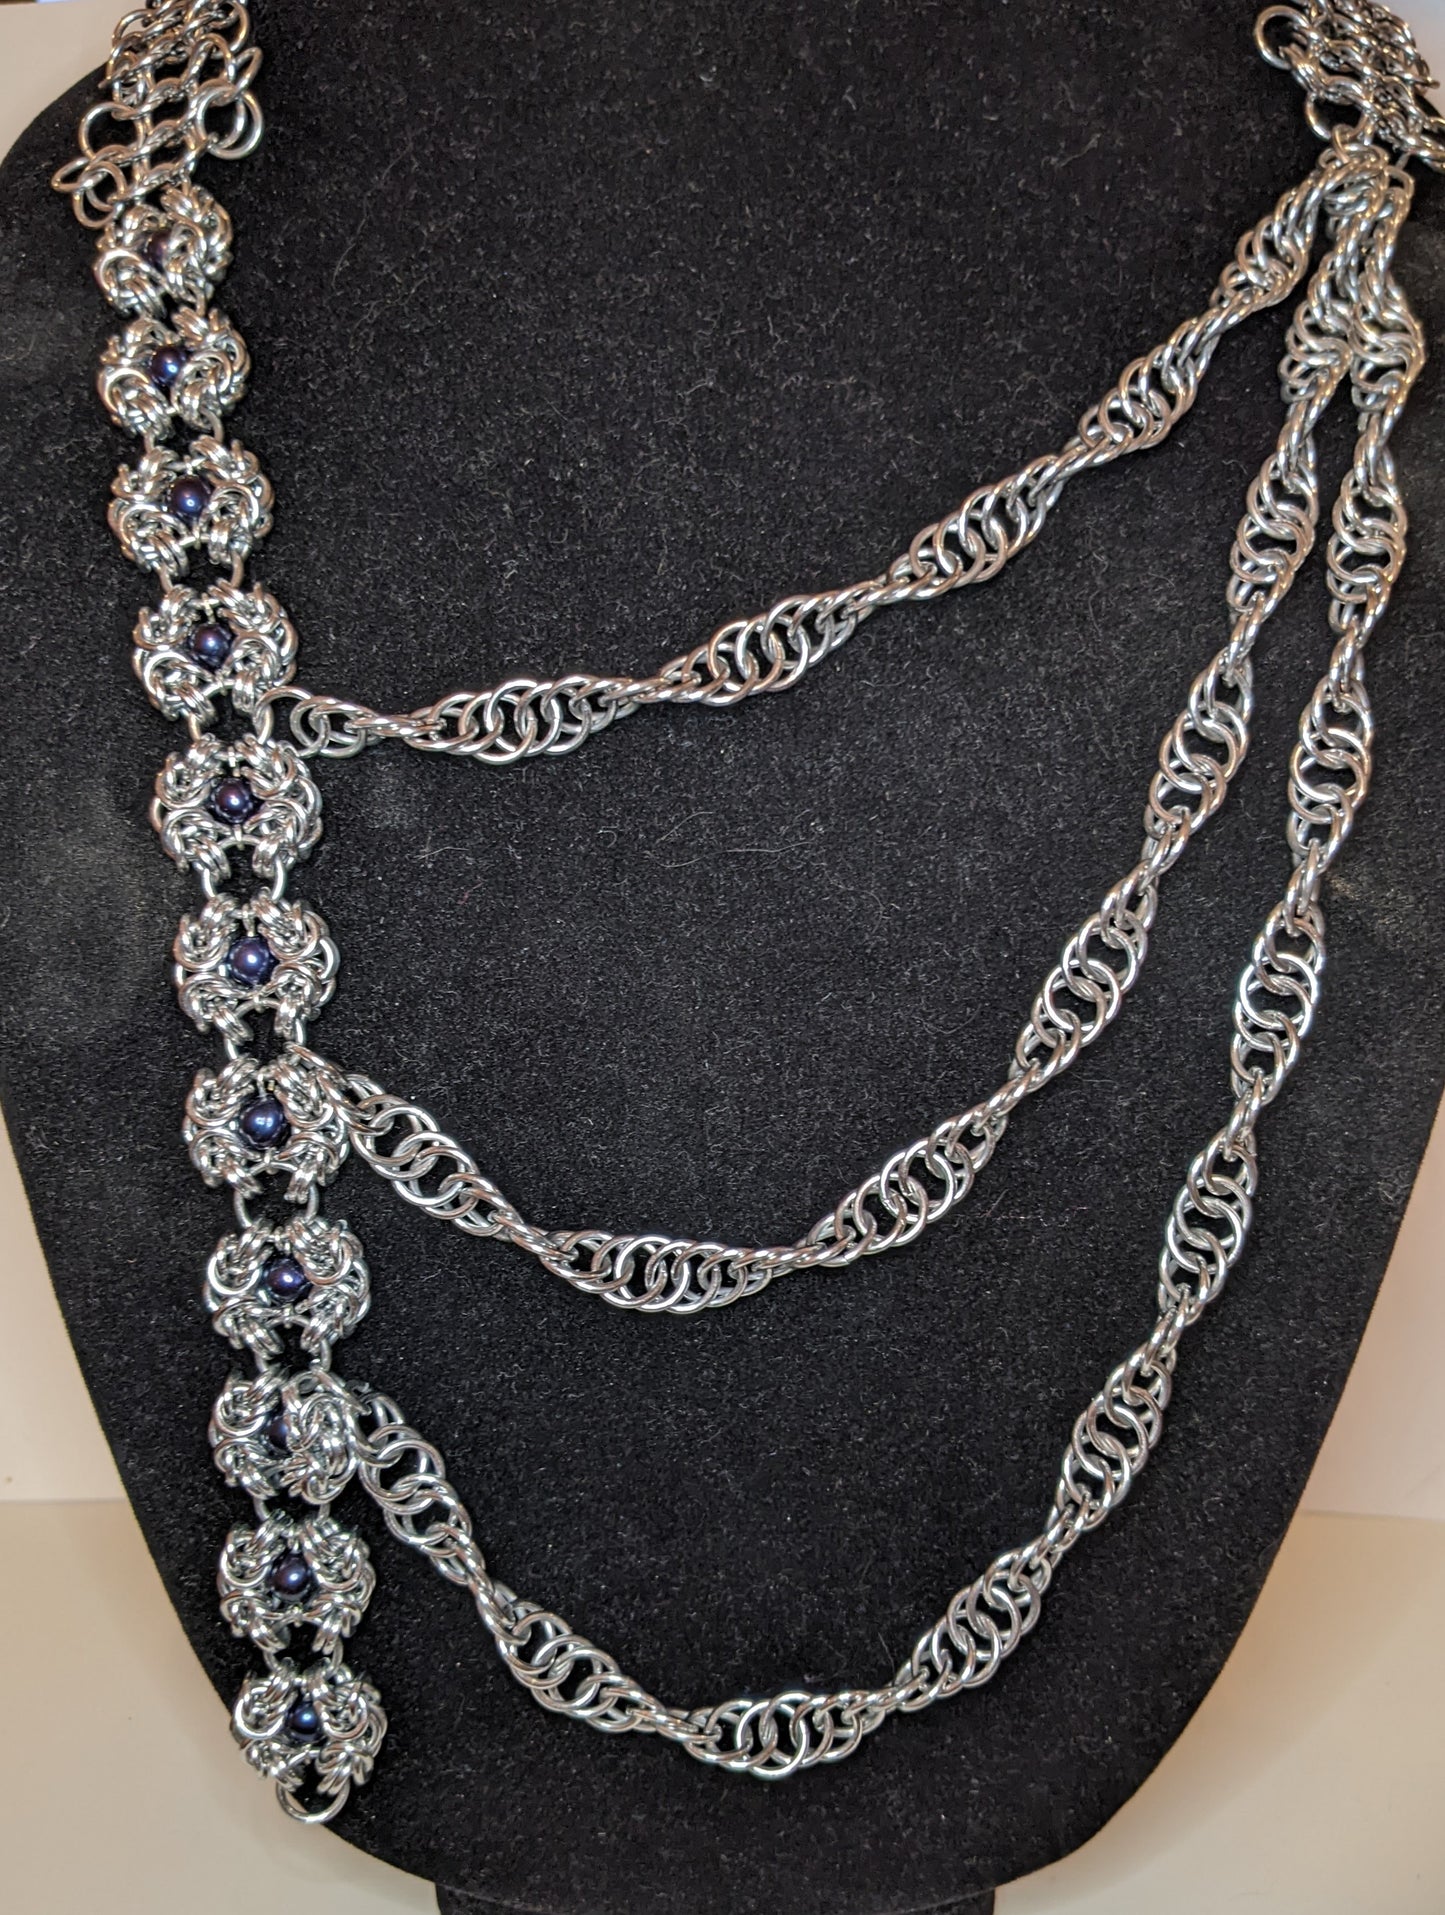 Silver asymmetrical chainmail necklace. At left are a series of Romanov weave flowers with black pearl bead centers, the right side is a series of three twisted ropes increasing in length that crosses over and attaches to the Romanov flowers. 